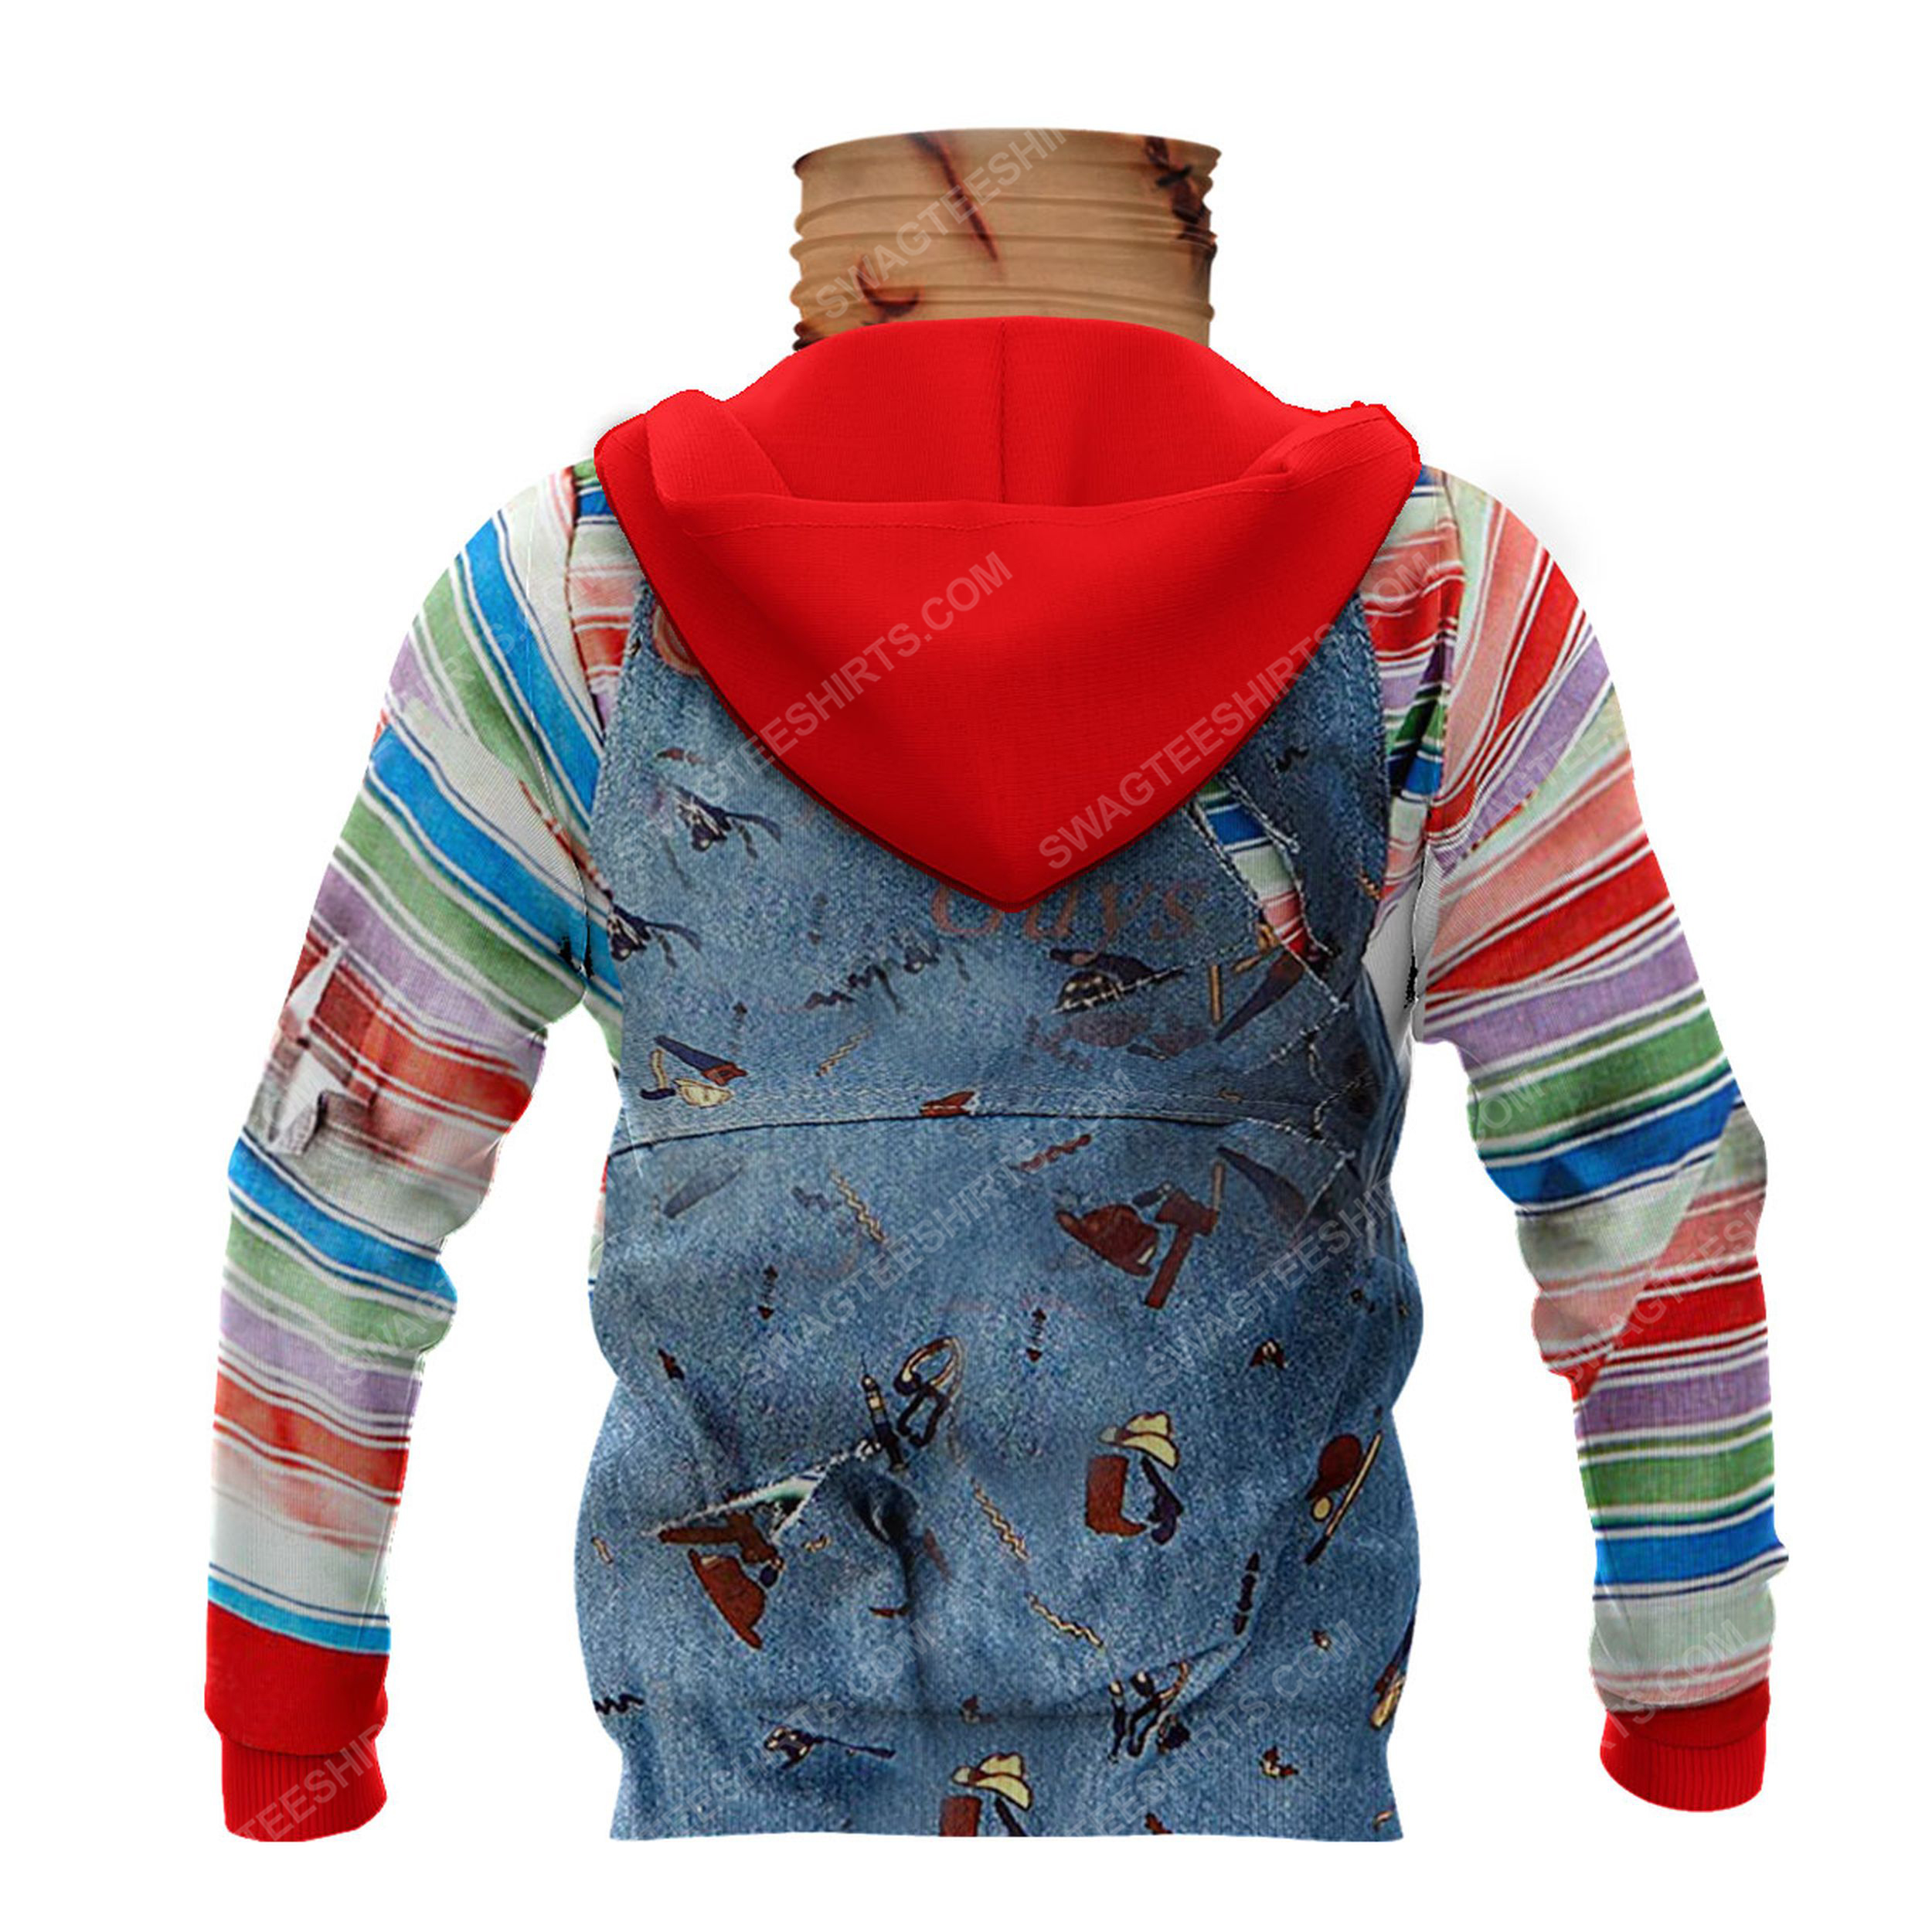 Chucky child's play for halloween full print mask hoodie 3(1)